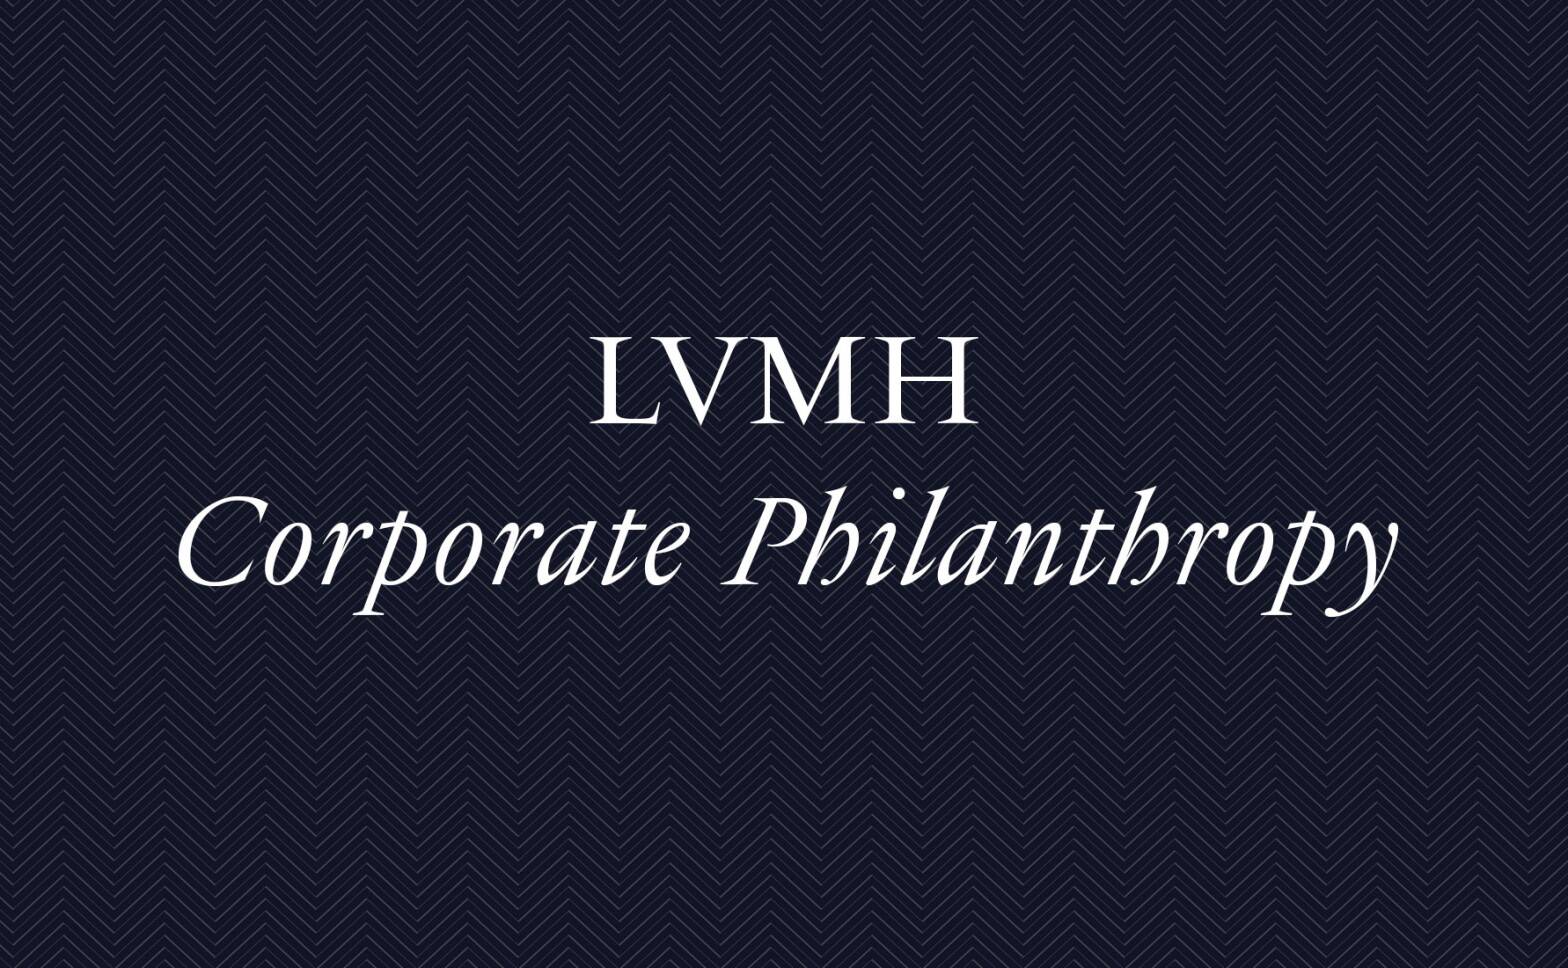 A year of commitment to society and the environment for LVMH and